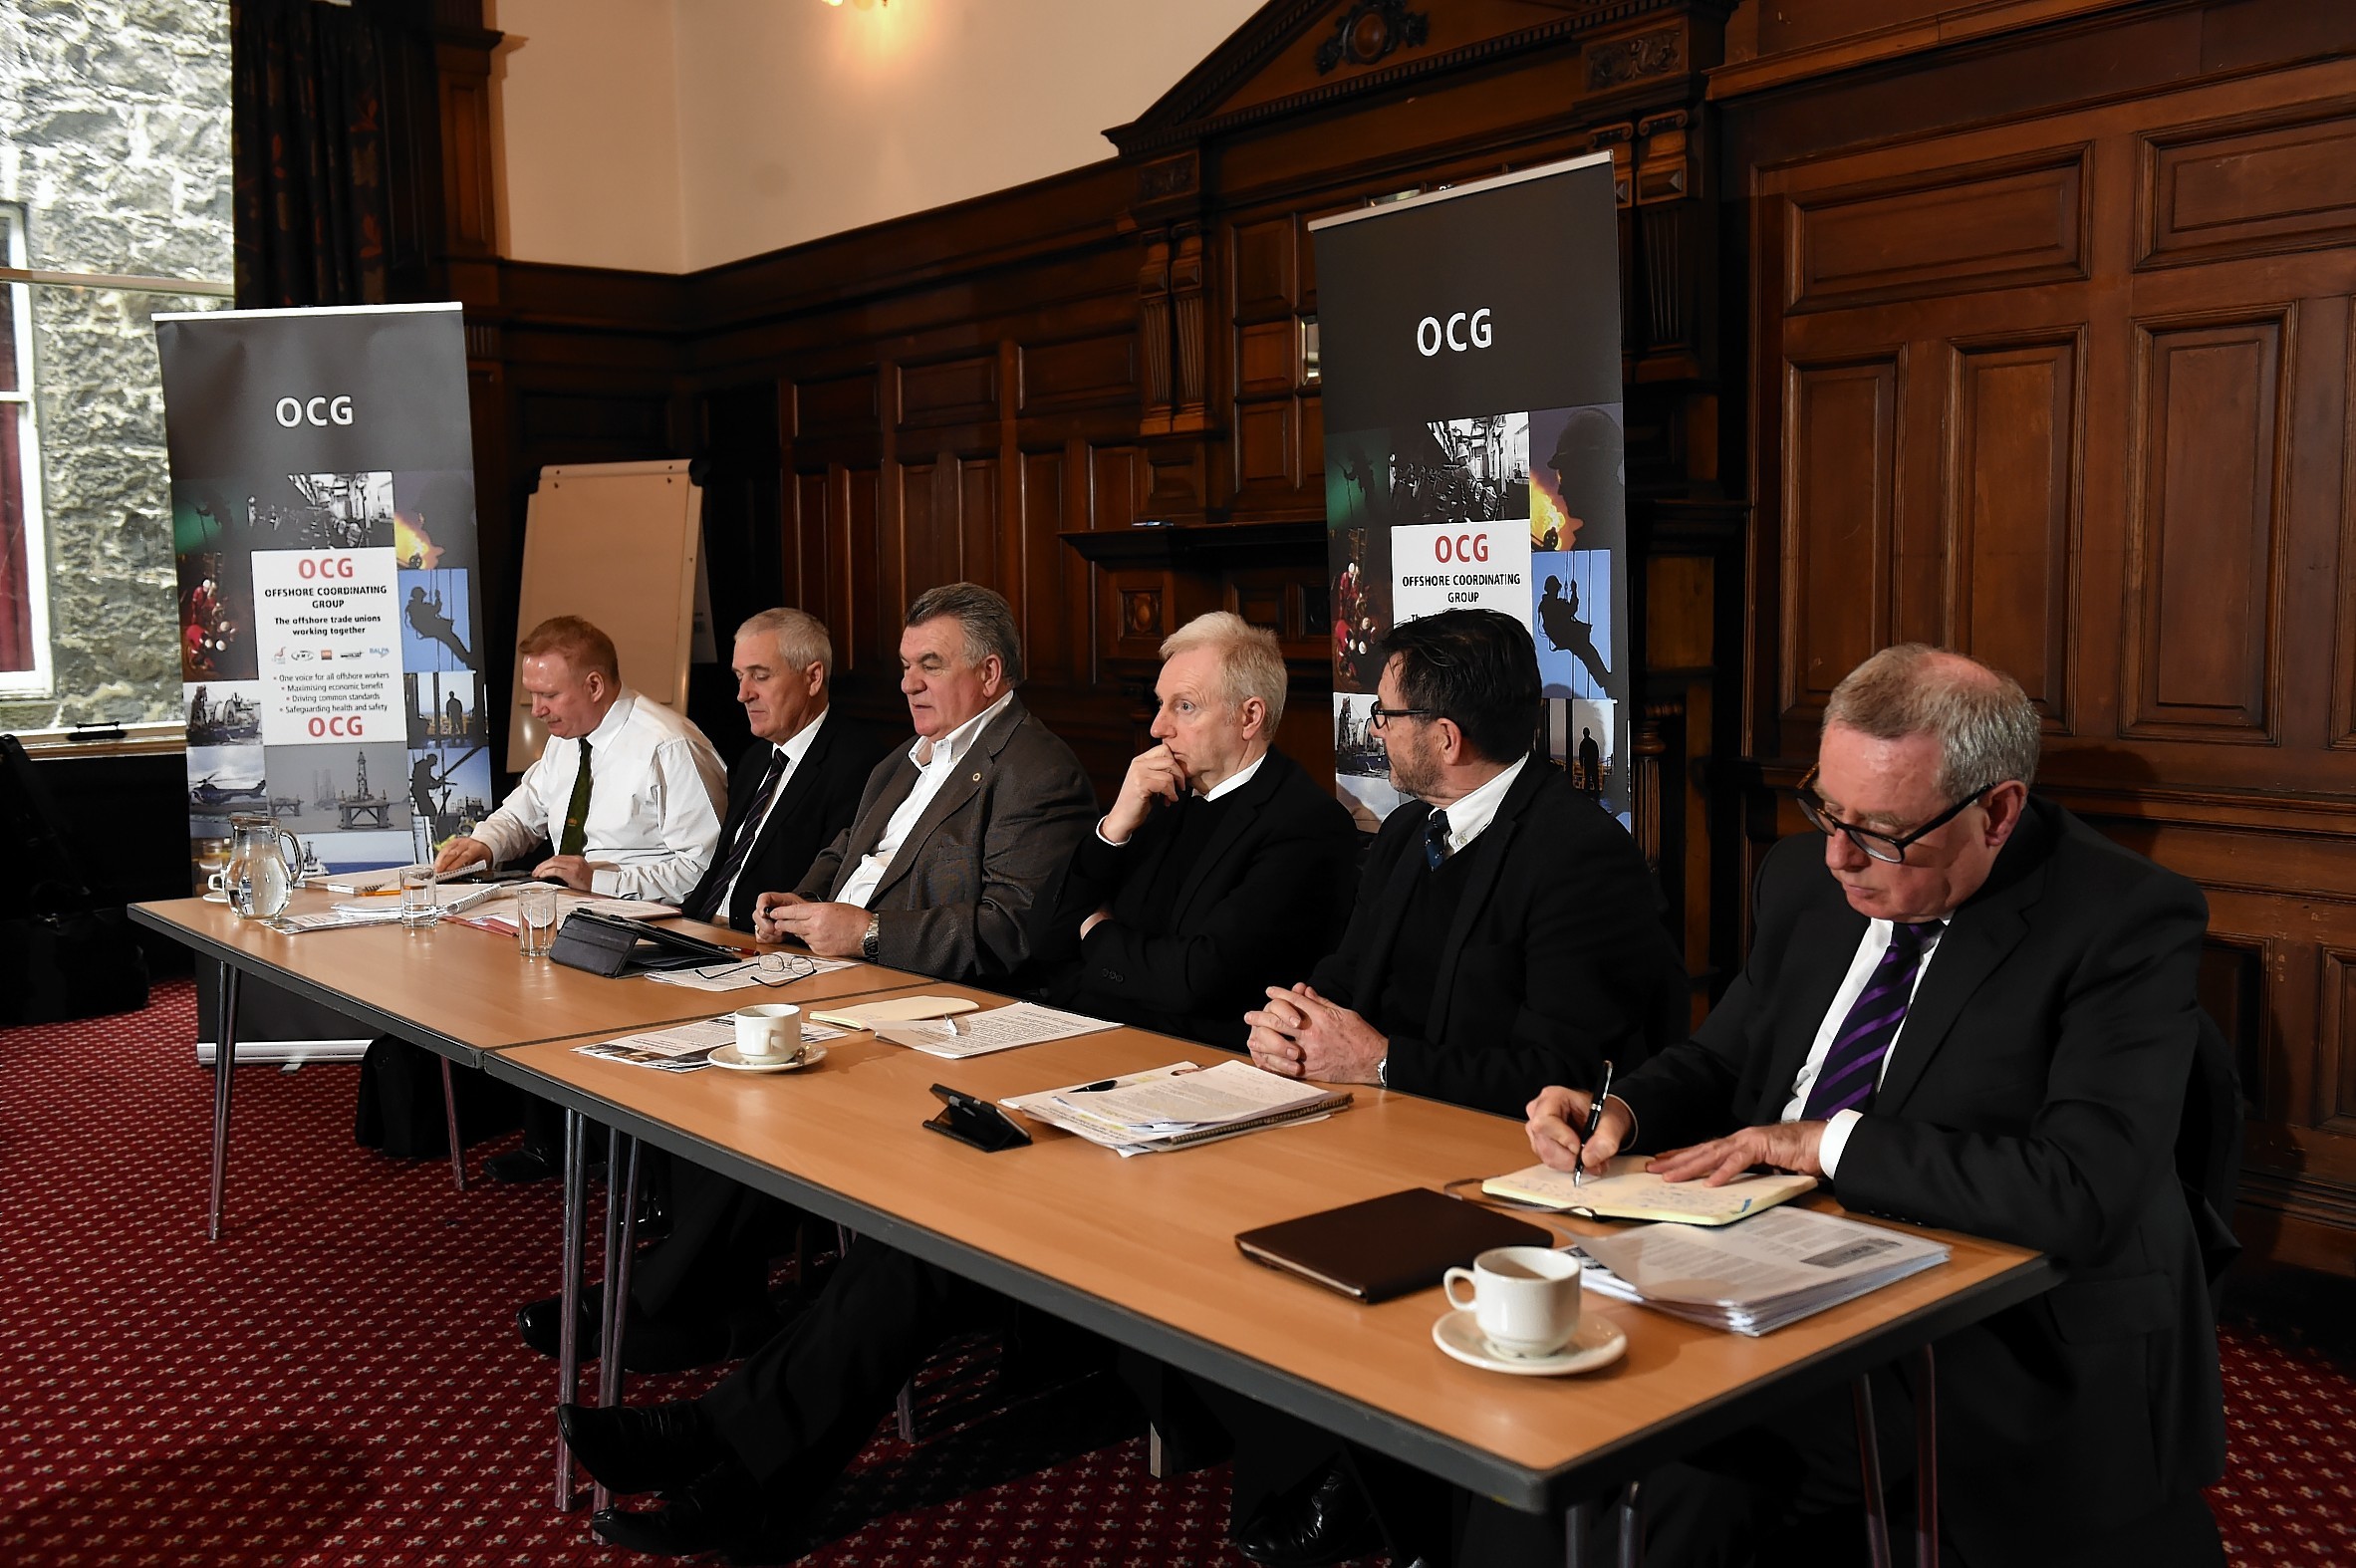 Union leaders at the launch of the OCG in Aberdeen this year.